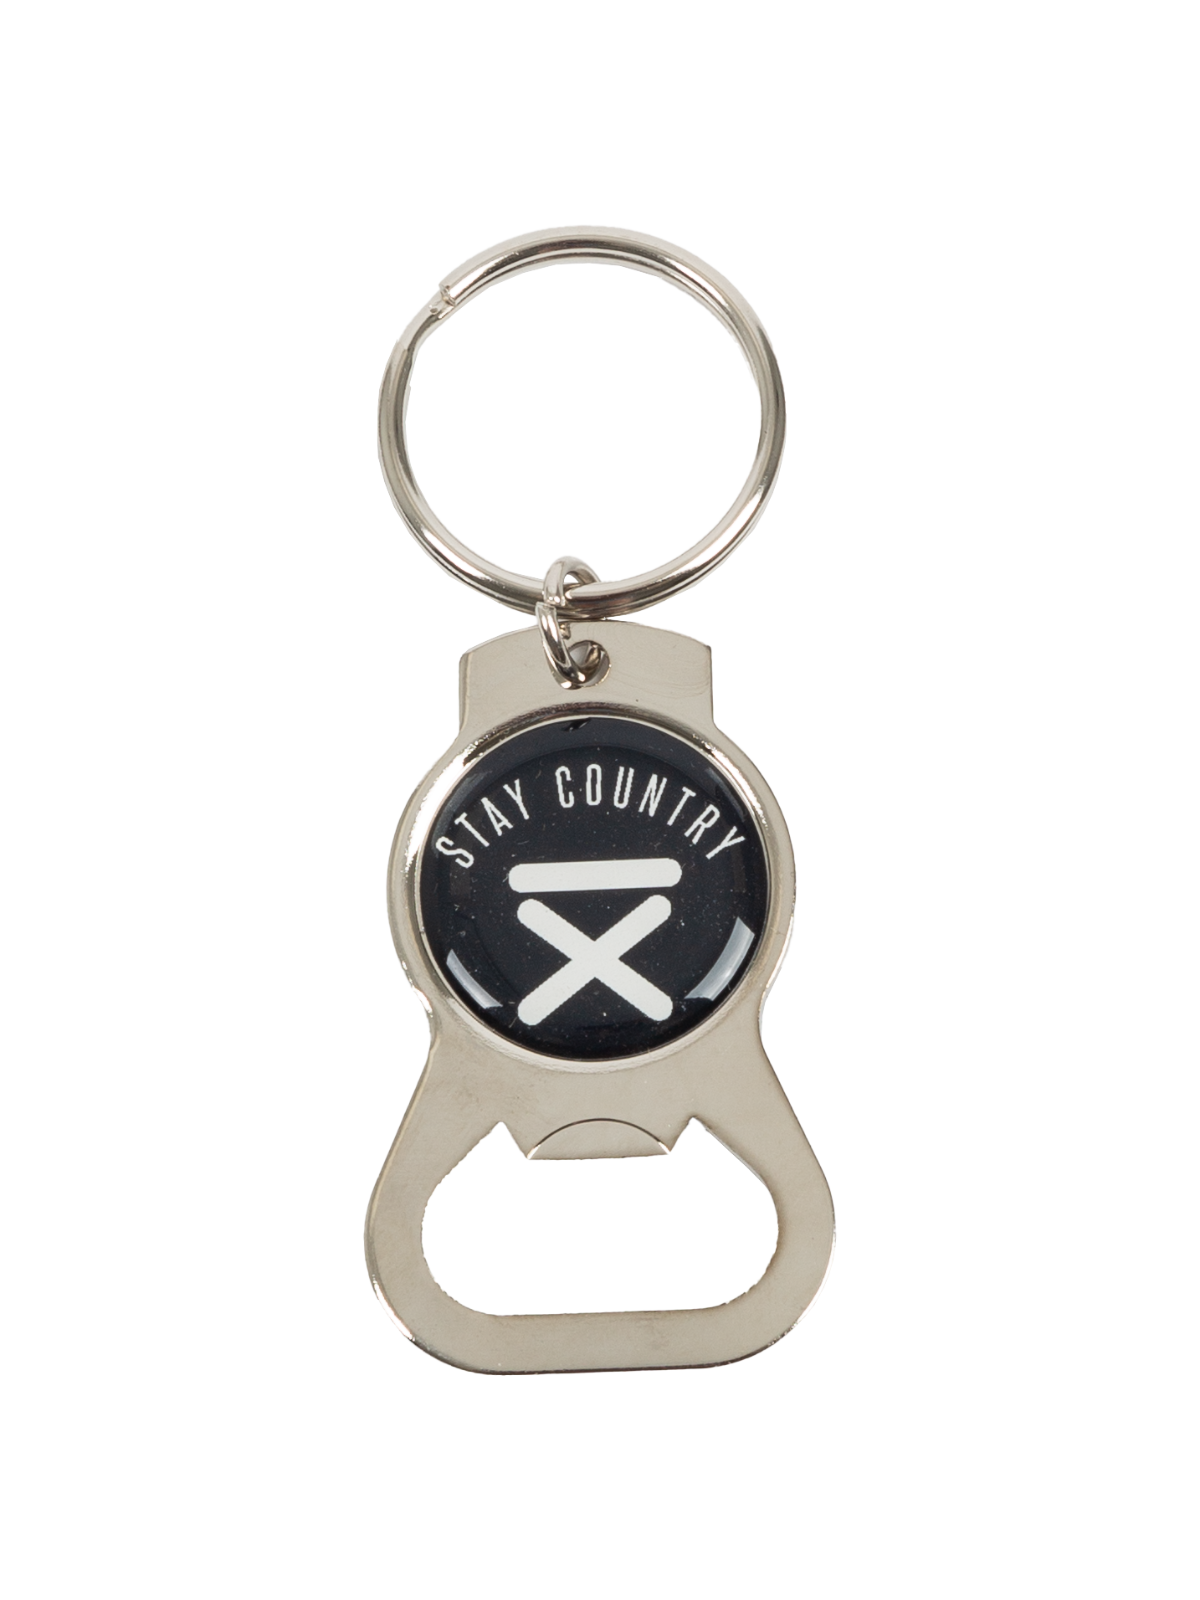 2020 Stay Country Bottle Opener Keychain